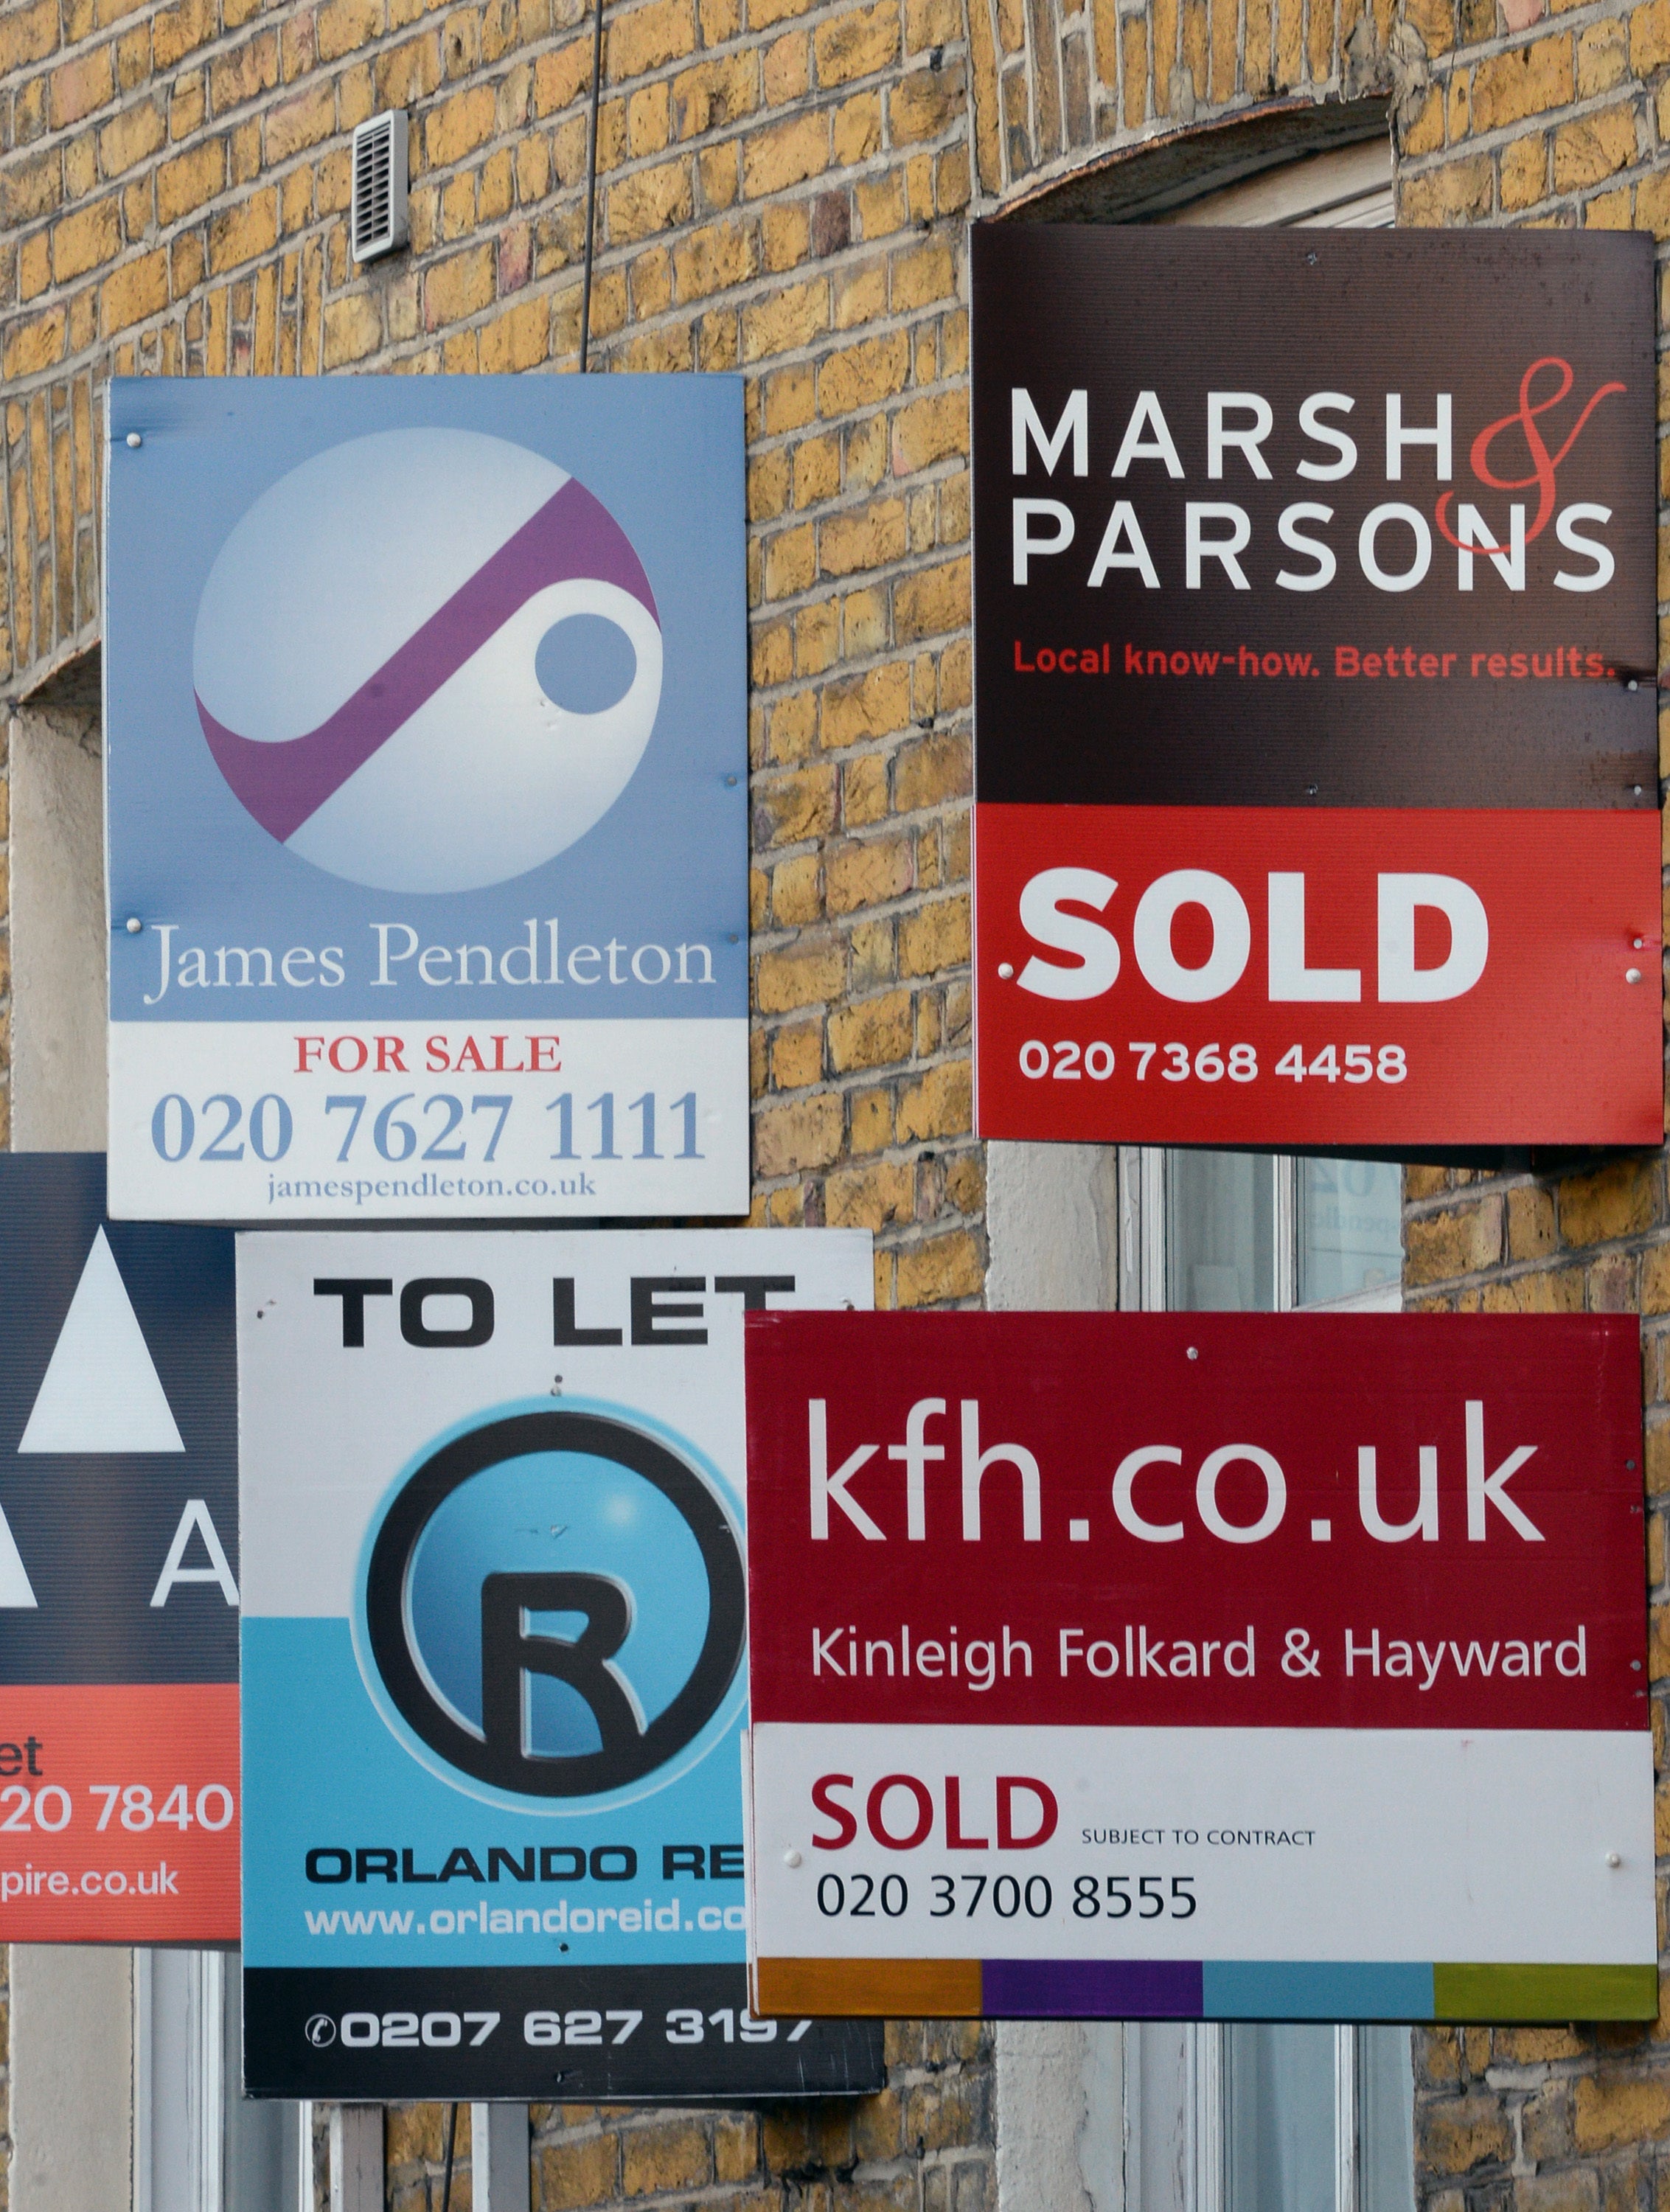 The average UK house price has increased by £1,691 per month since the UK first entered lockdown in March 2020, according to Halifax (Anthony Devlin/PA)